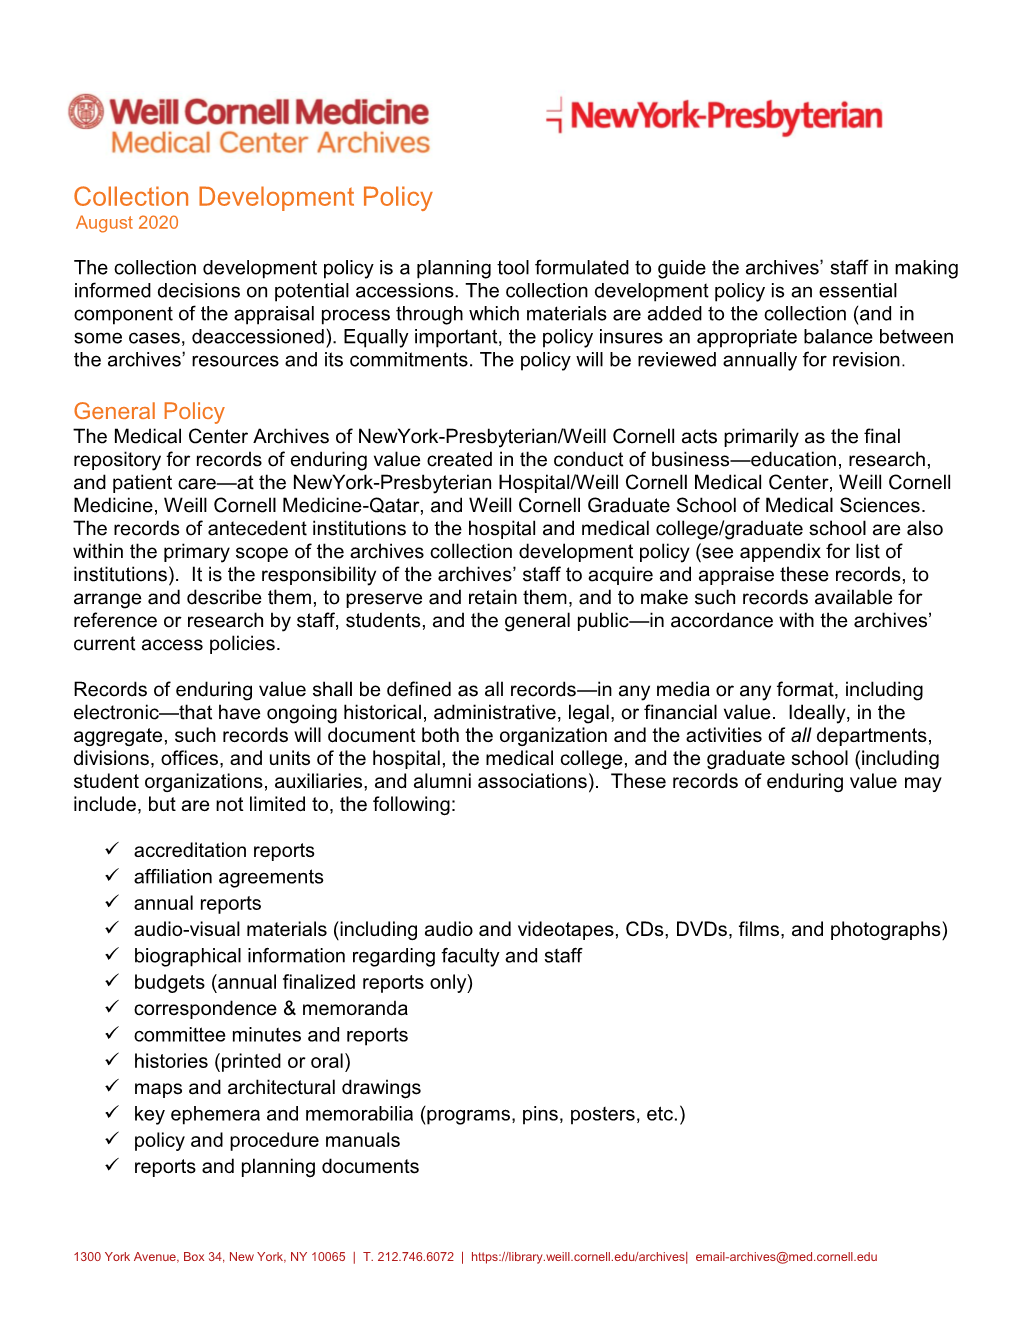 Collection Development Policy August 2020